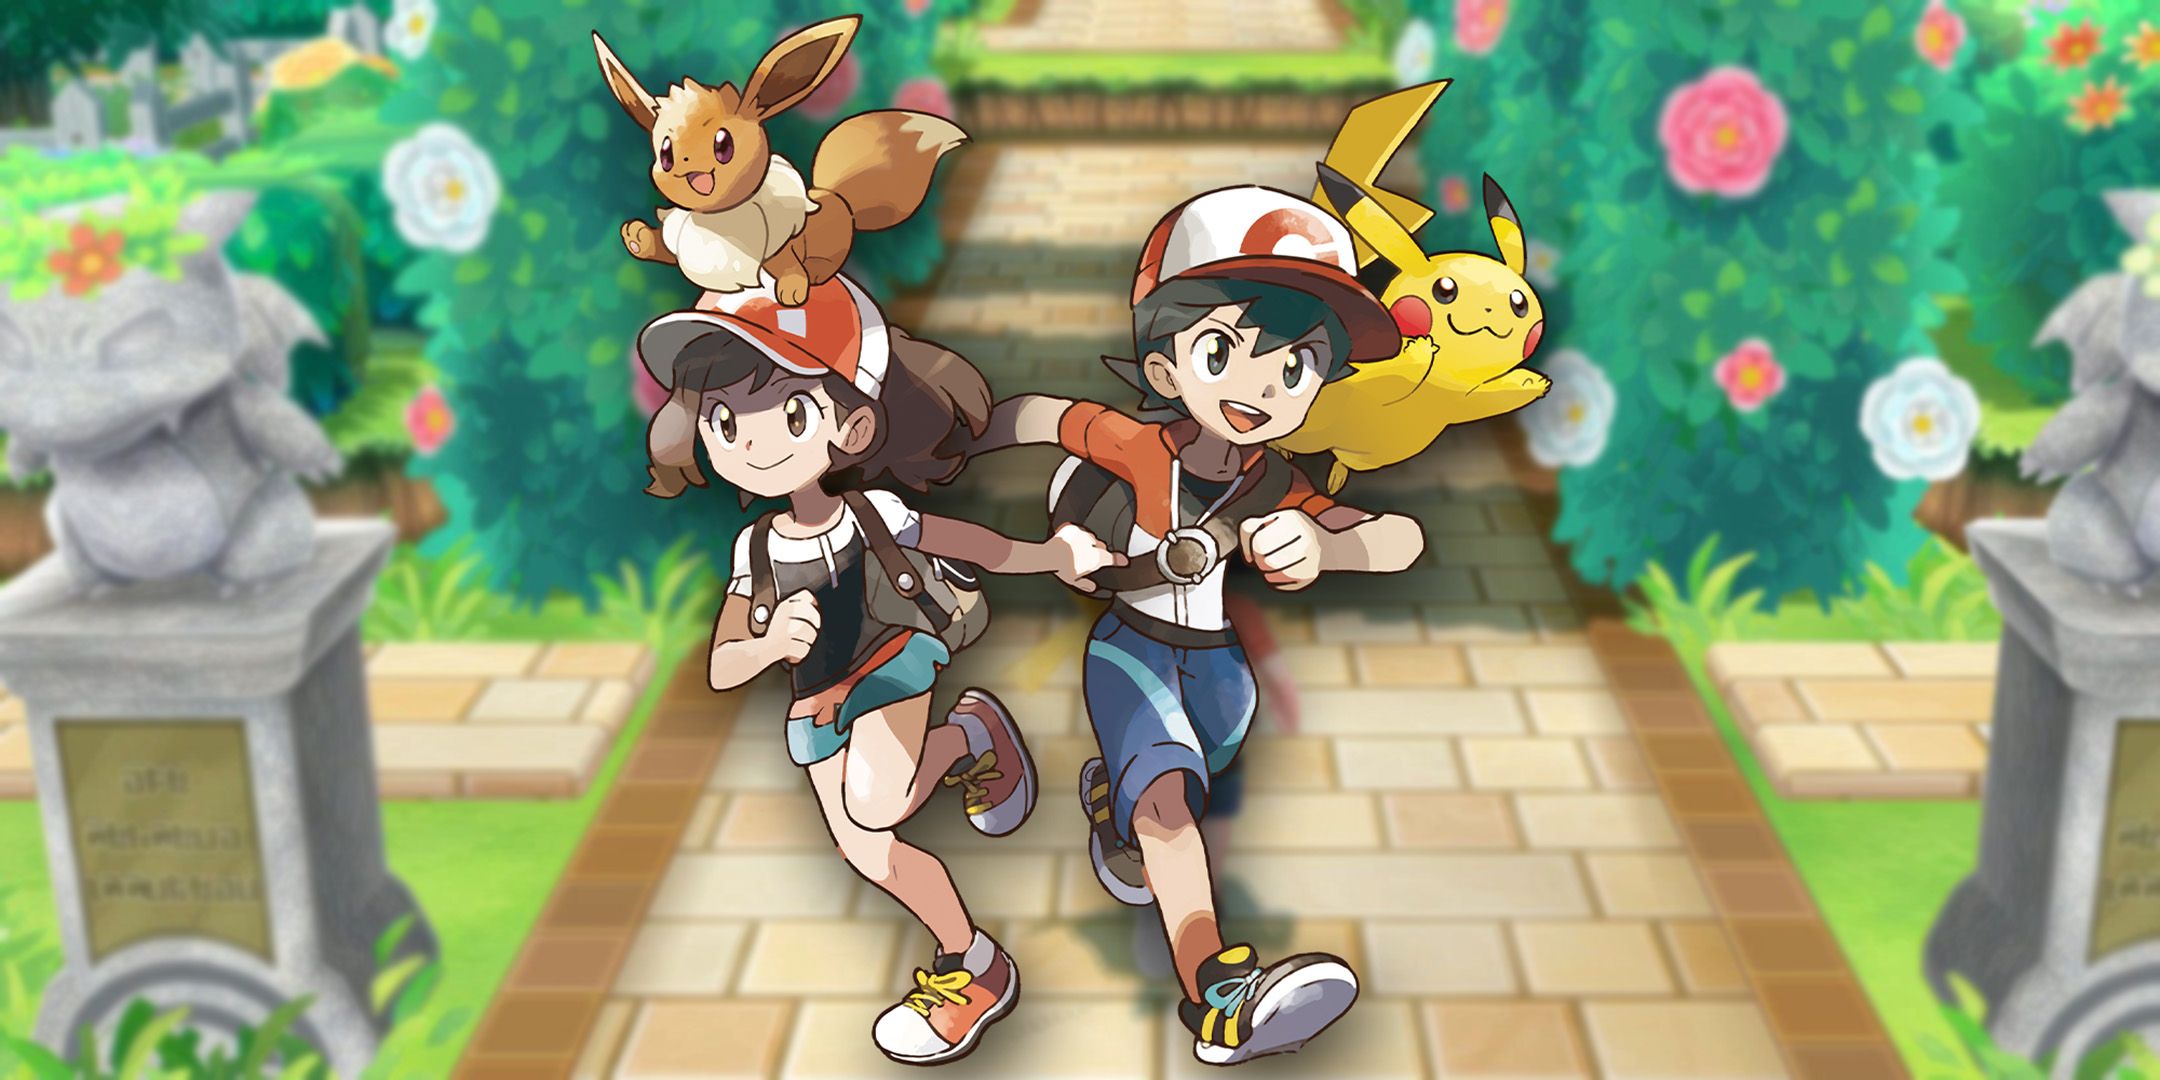 Pokemon Let's Go Boy and Girl trainers with Pikachu and Eevee running through the kanto grass gym